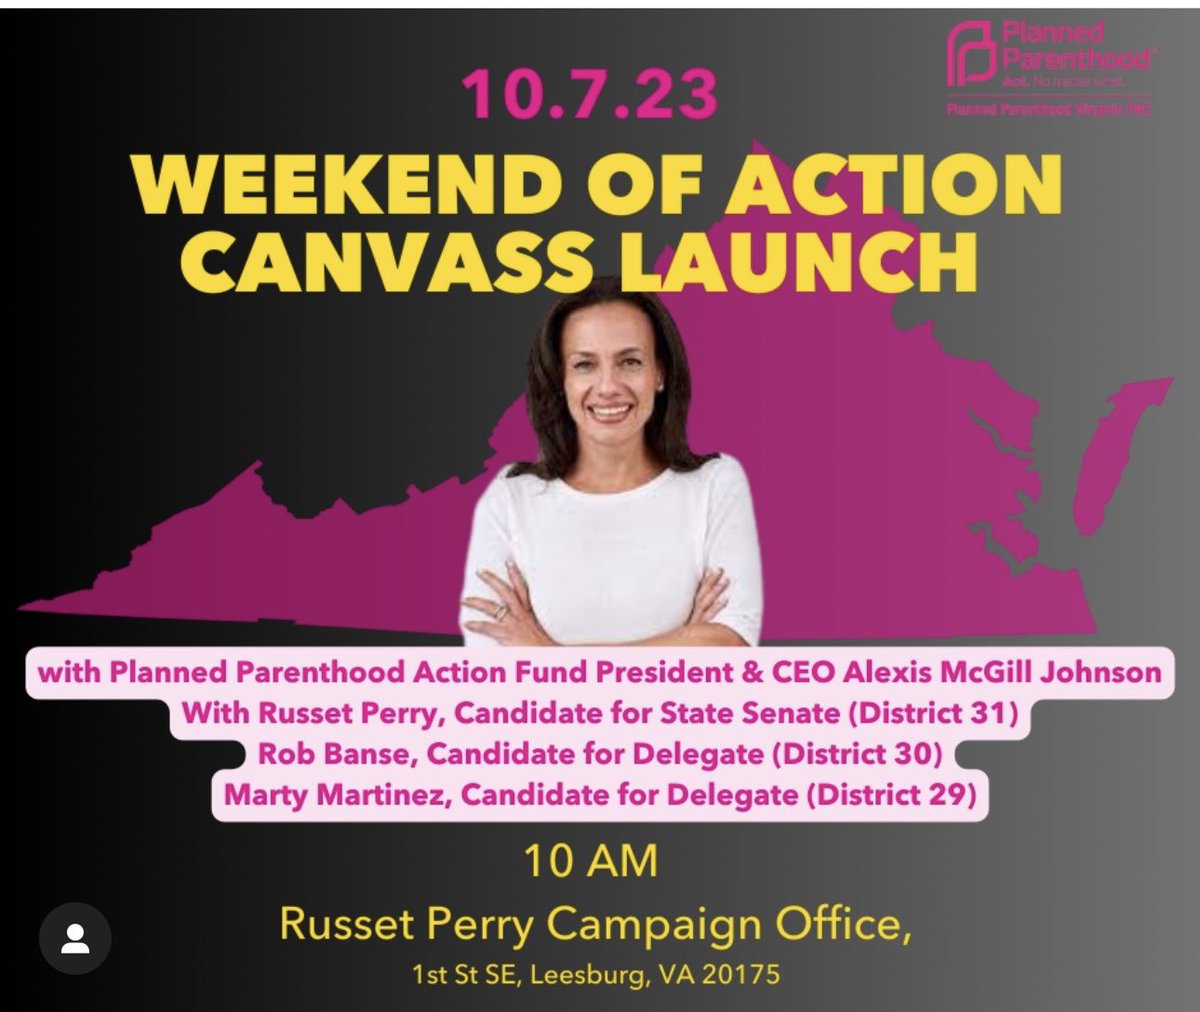 💗We can’t wait to see @alexismcgill President of @PPact tomorrow at our canvass launch!!!! 💗Join us TOMORROW at 10 AM for a weekend of action kick off for @RussetPerry Rob Banse and Marty Martínez!!!!! #abortionisontheballot #VAelections